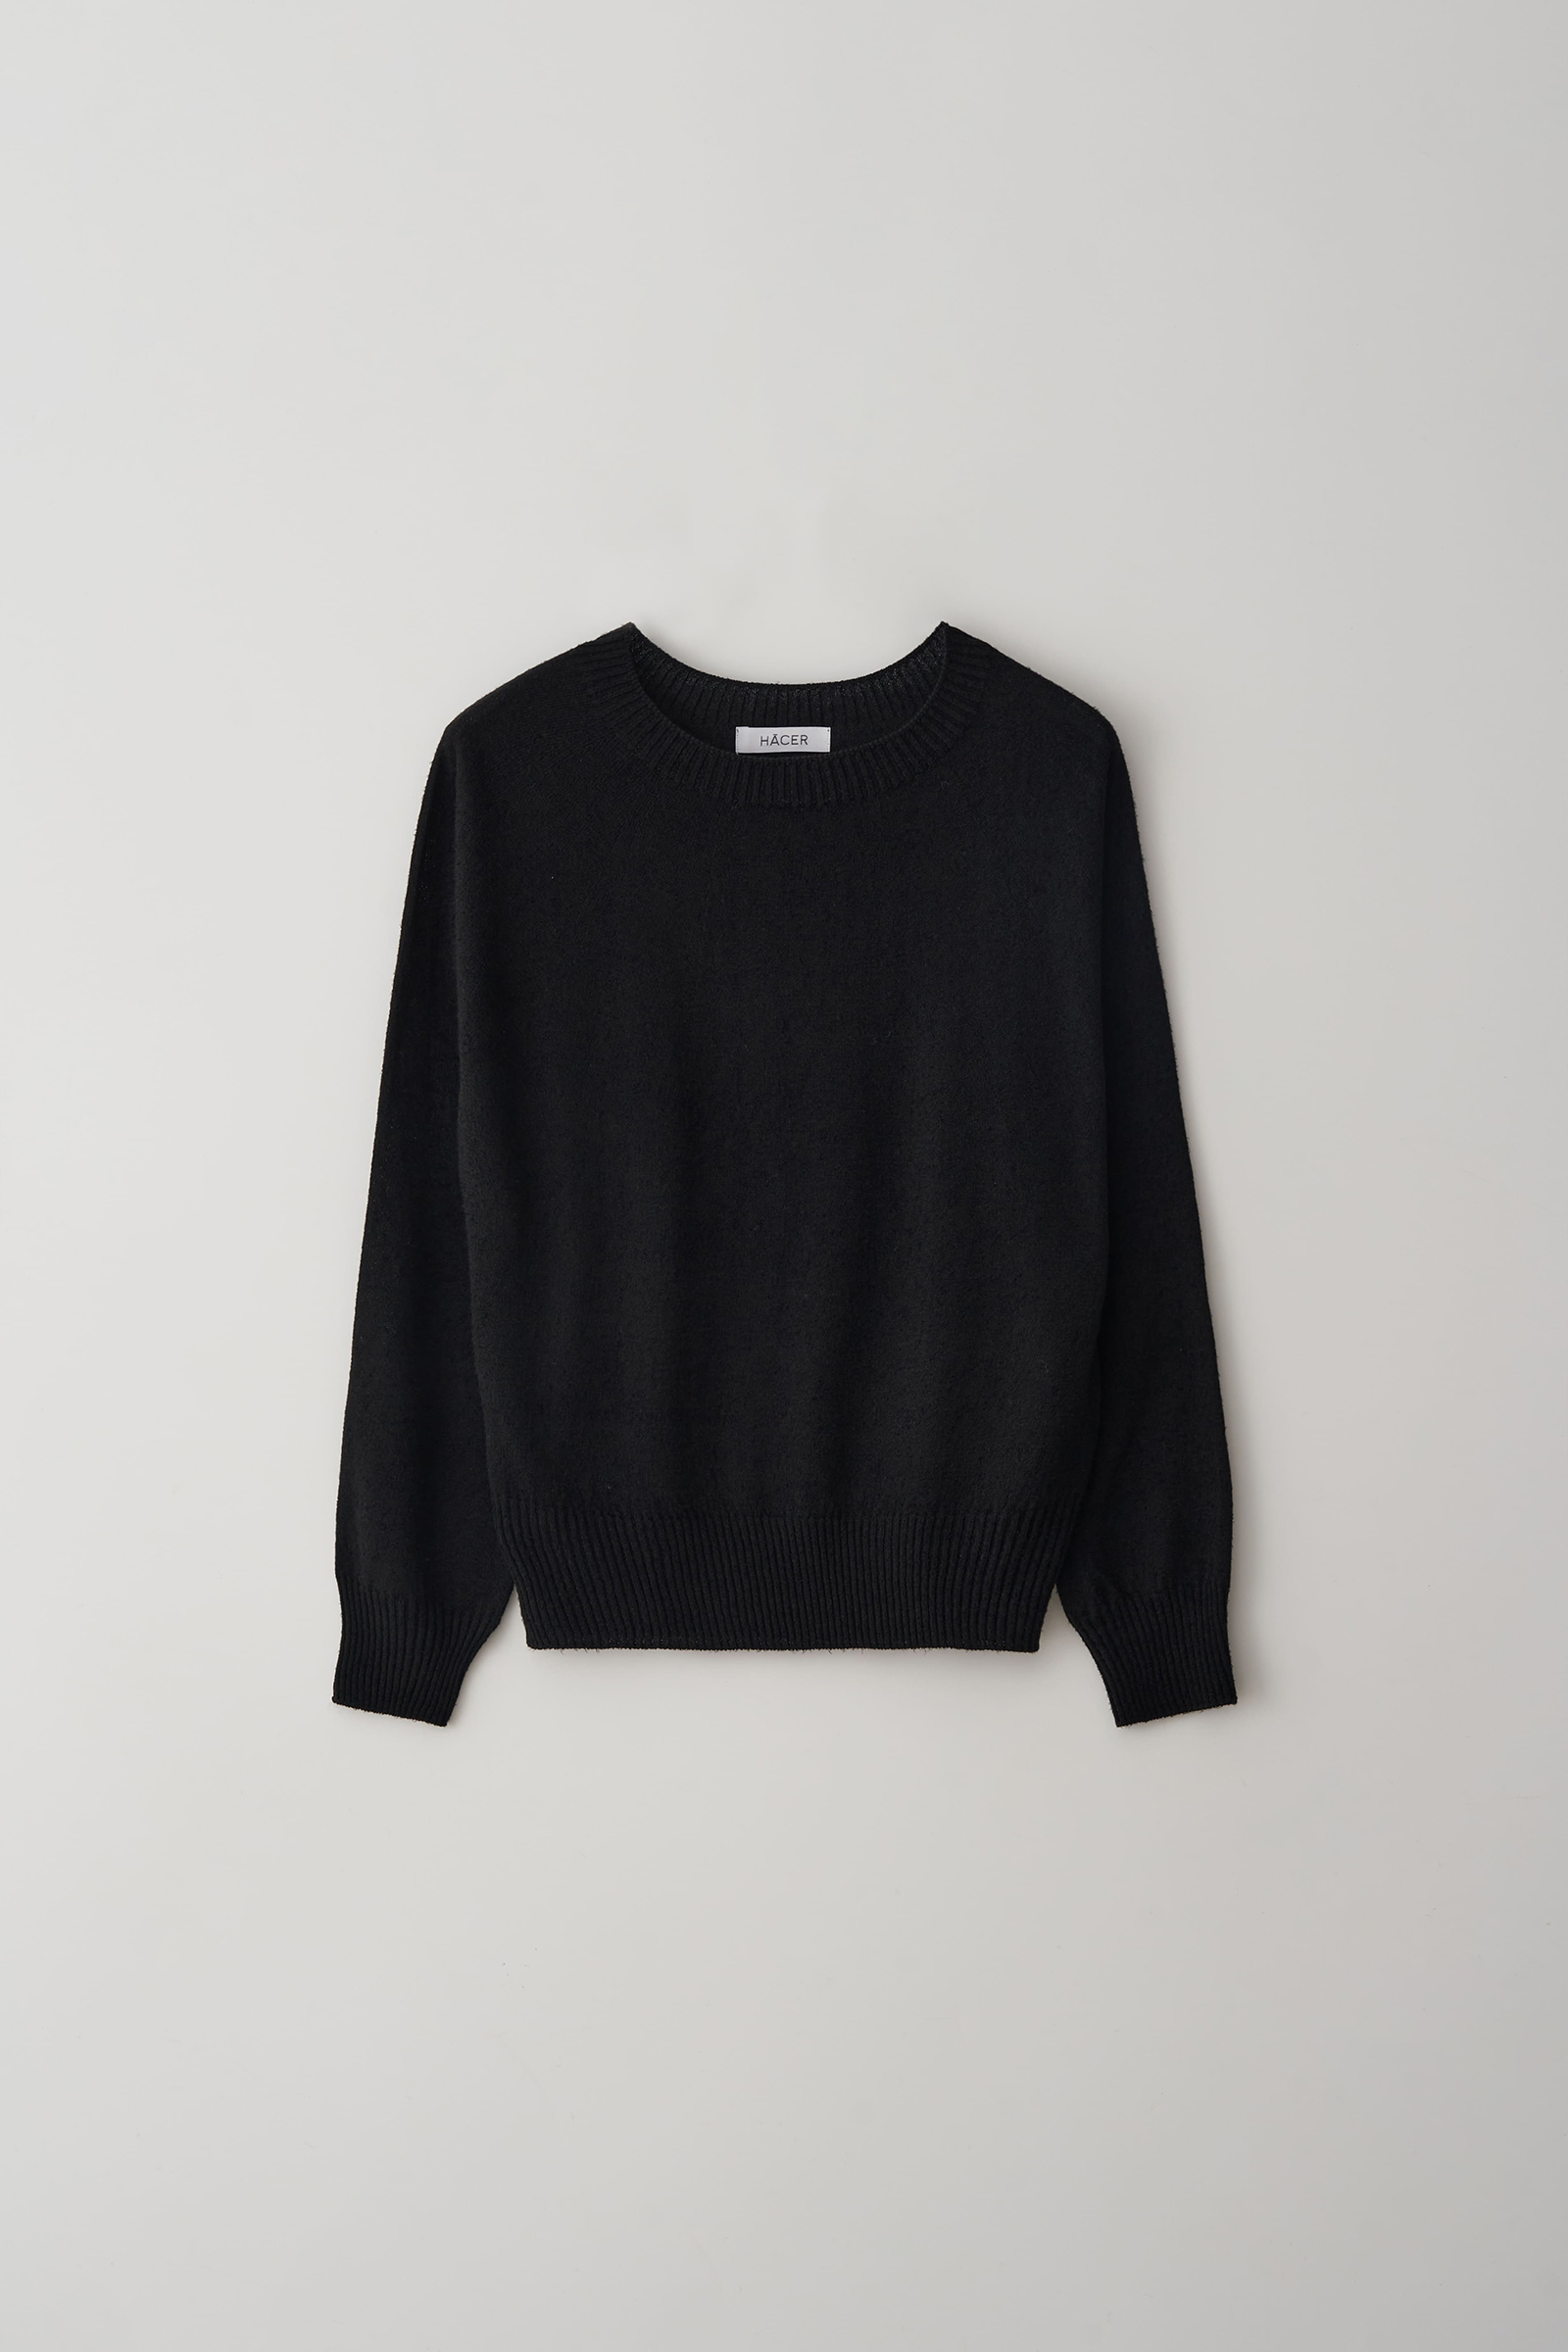 [3rd] Whole Garment Pullover